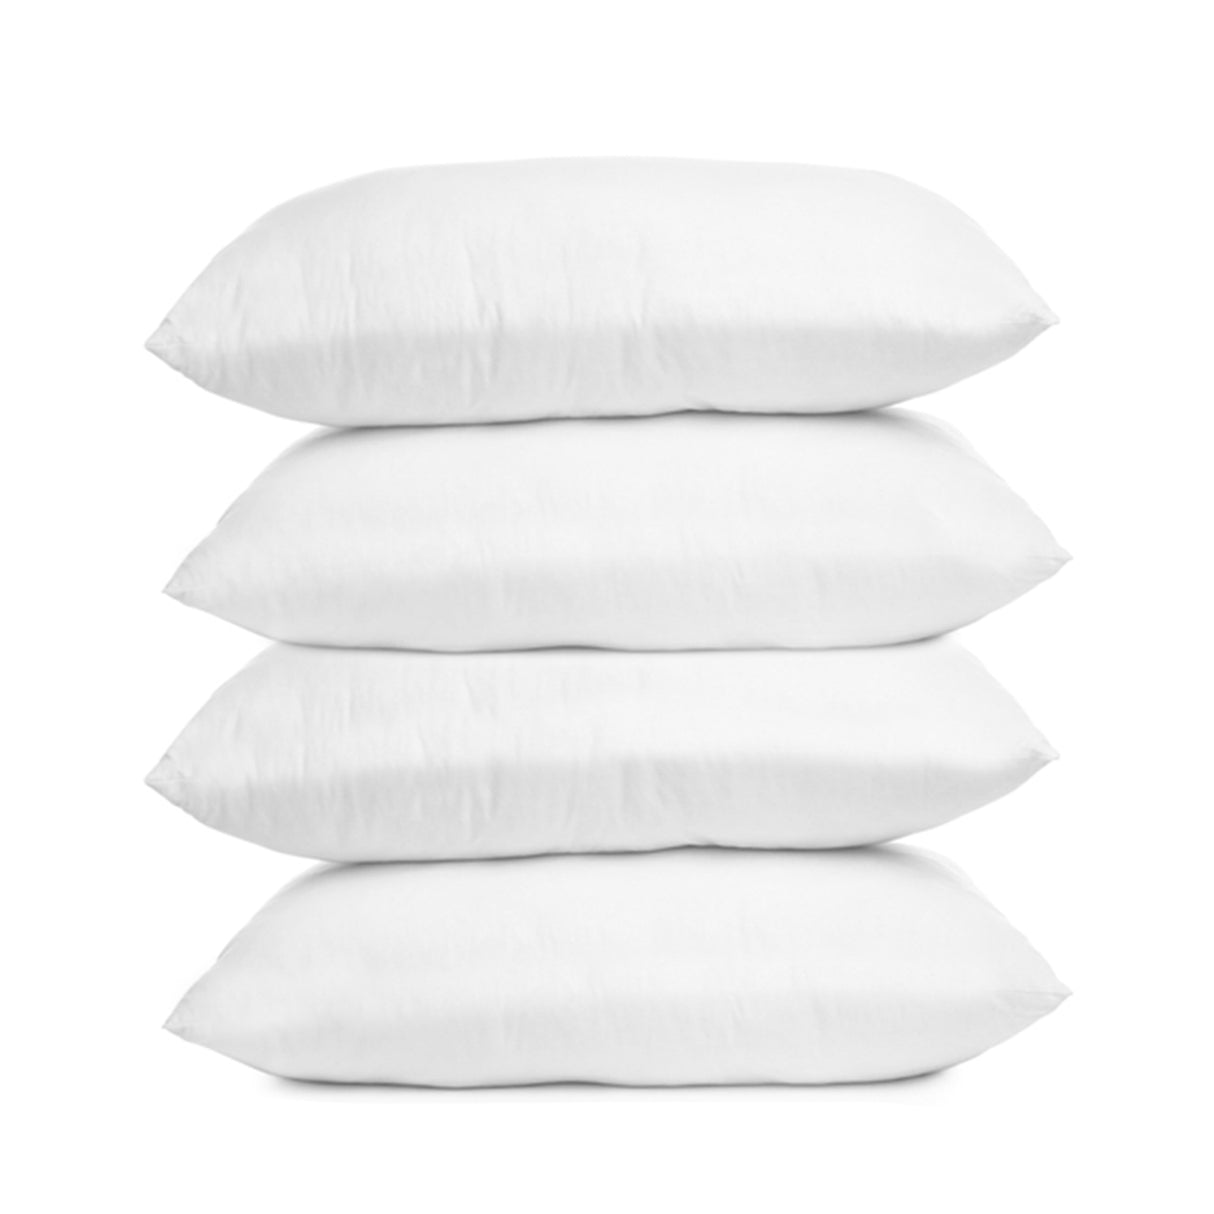 Trendy Home 12x18 Premium Stuffer Home & Office Decorative Cushion (Pack of 4)